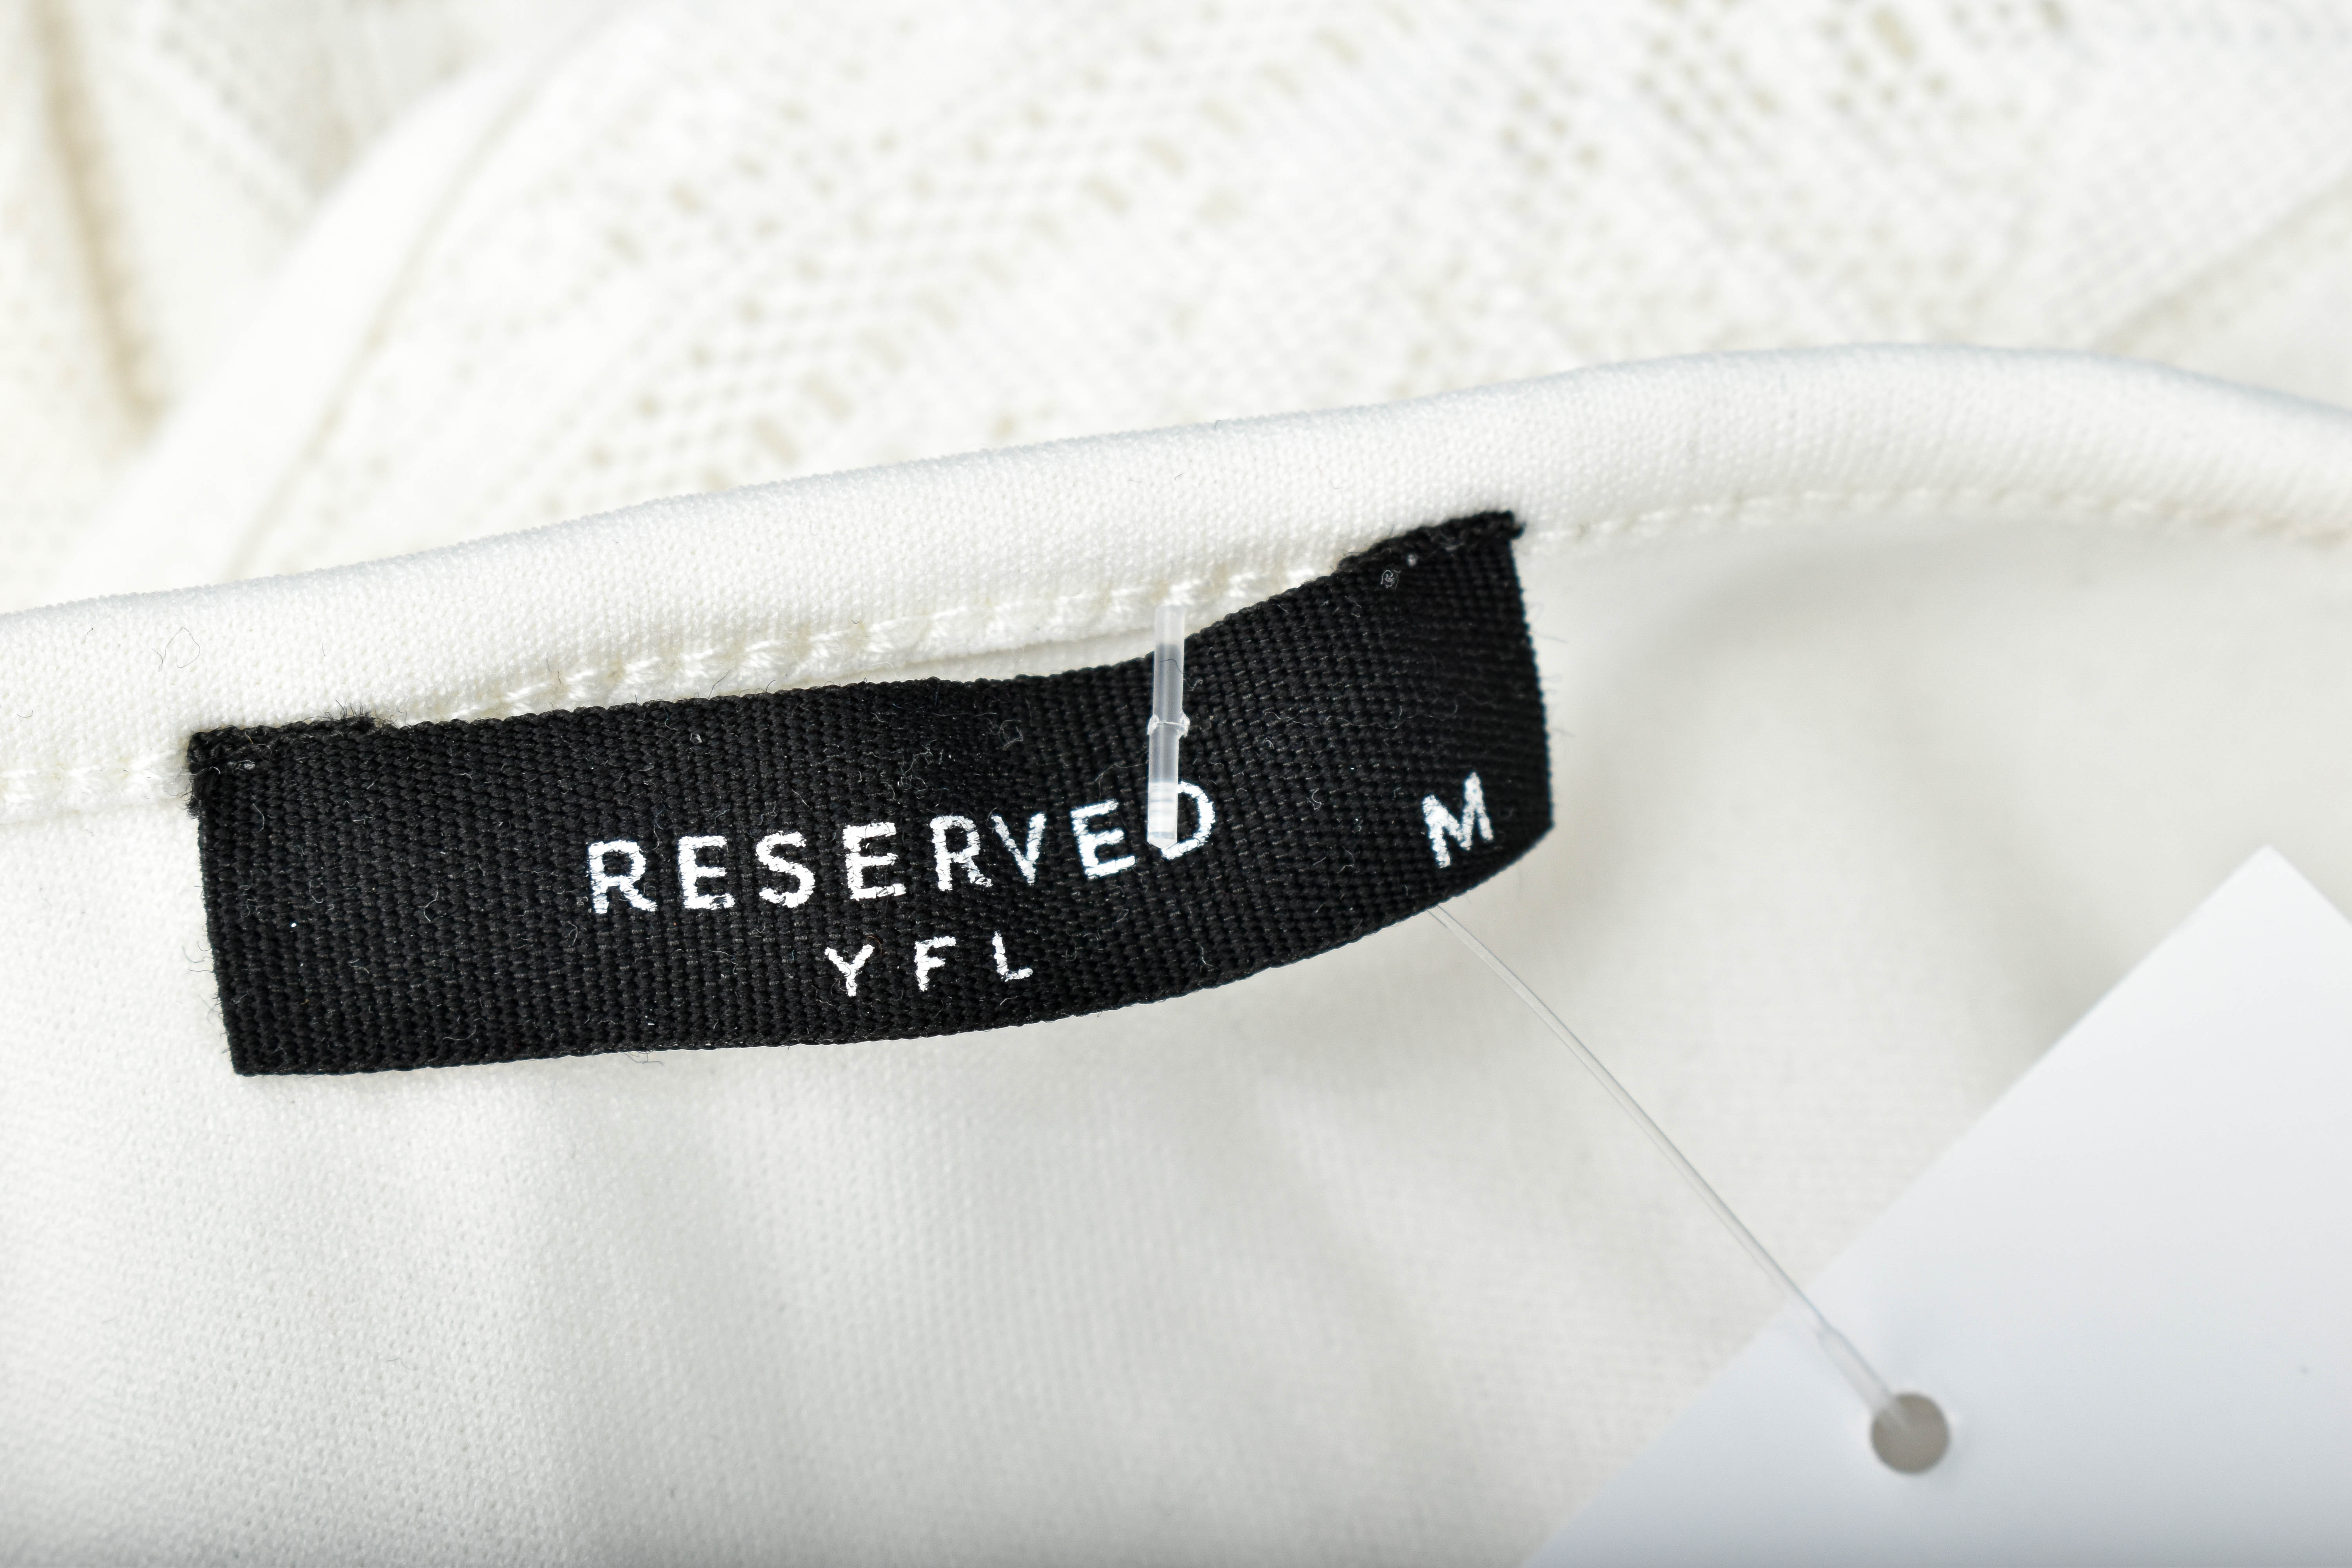 Women's top - Yfl RESERVED - 2